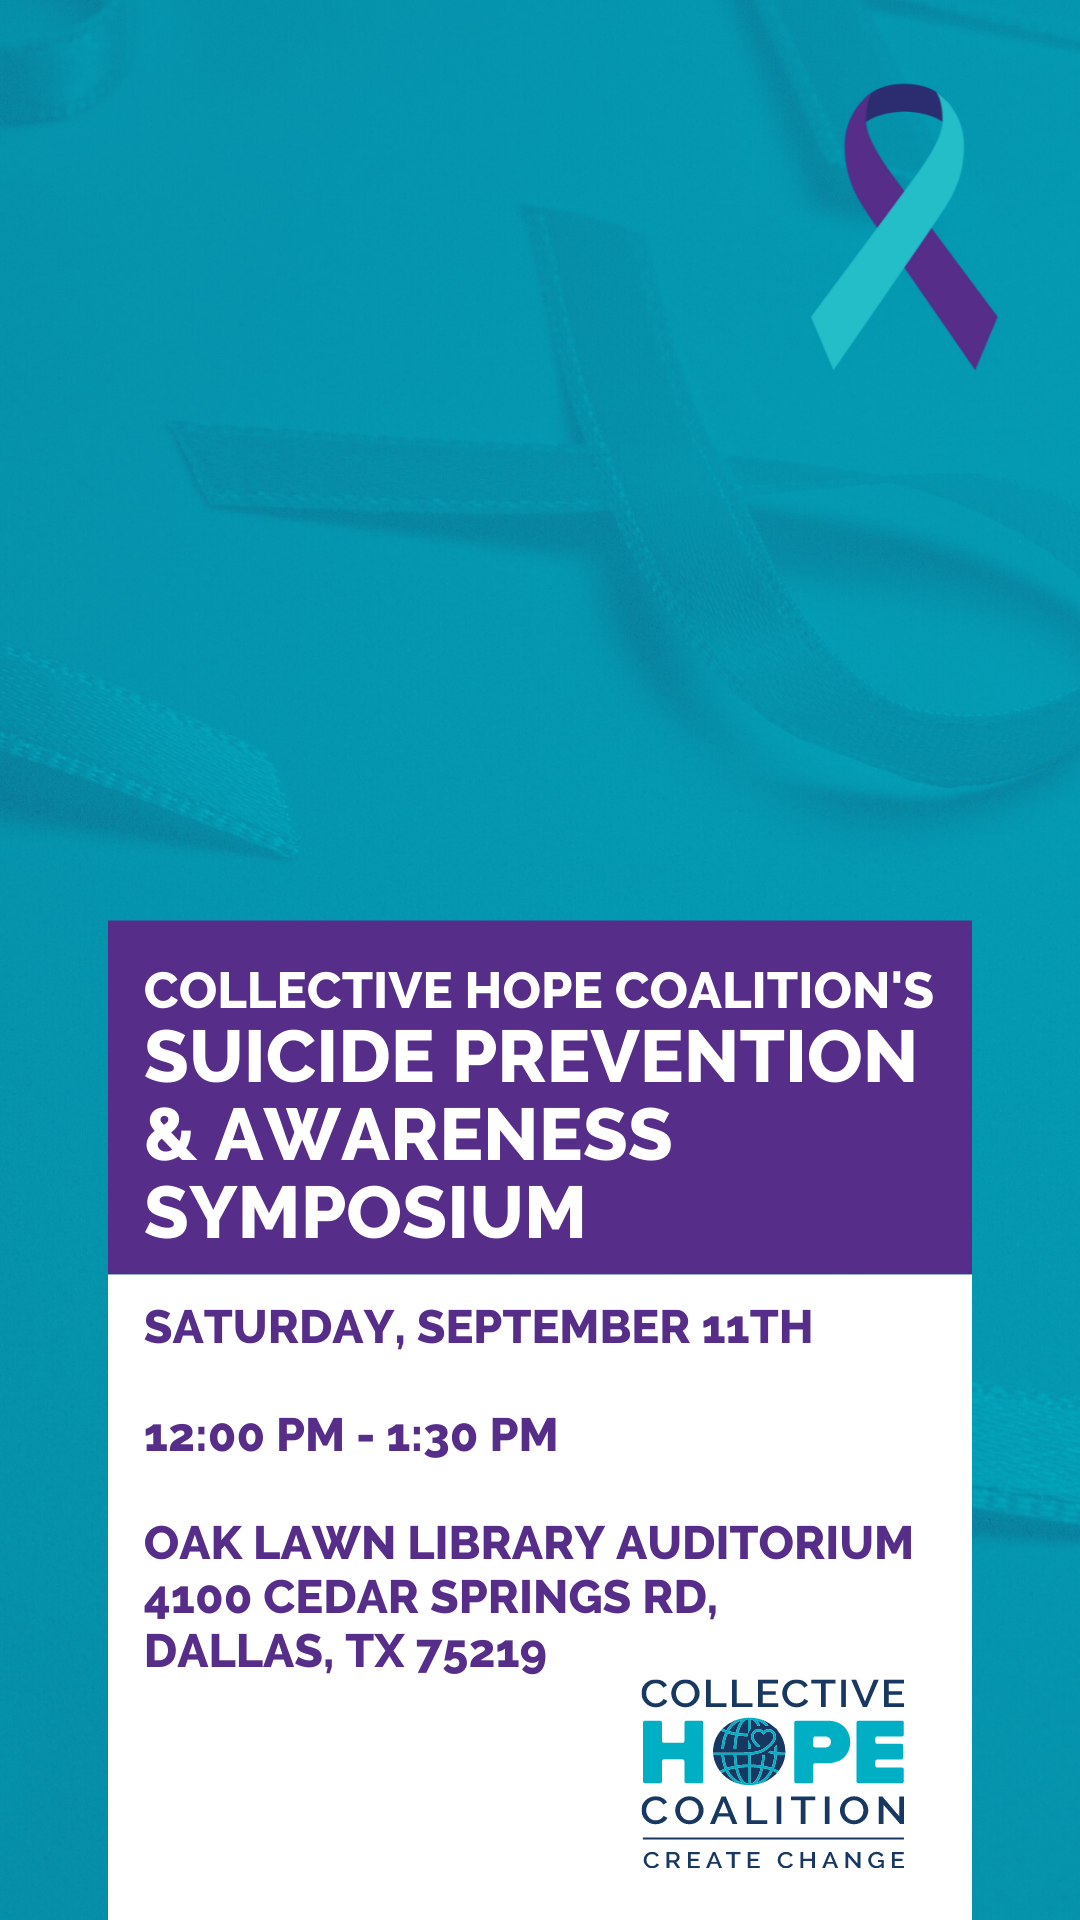 Collective Hope Coalition's Suicide Prevention & Awareness Symposium